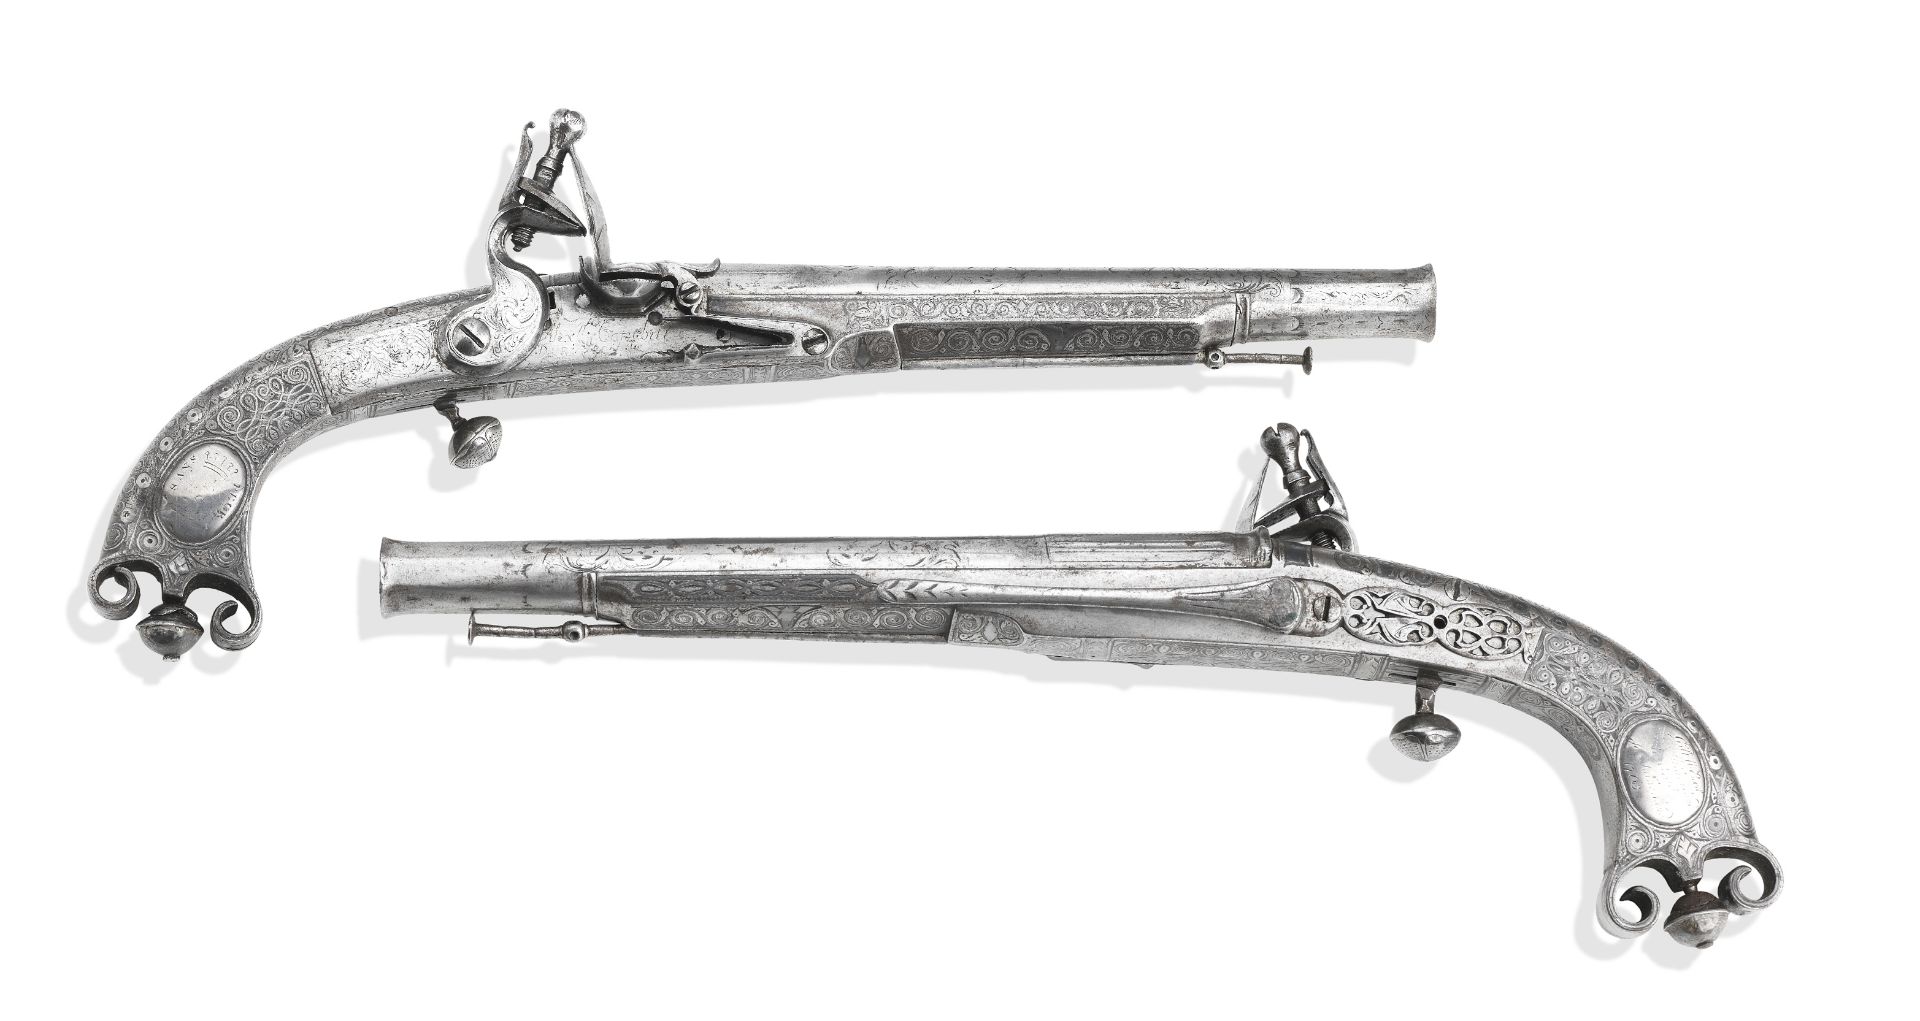 A Rare Pair Of Scottish All-Metal Flintlock Belt Pistols Gifted By William Gorden, 18th Earl Of S...